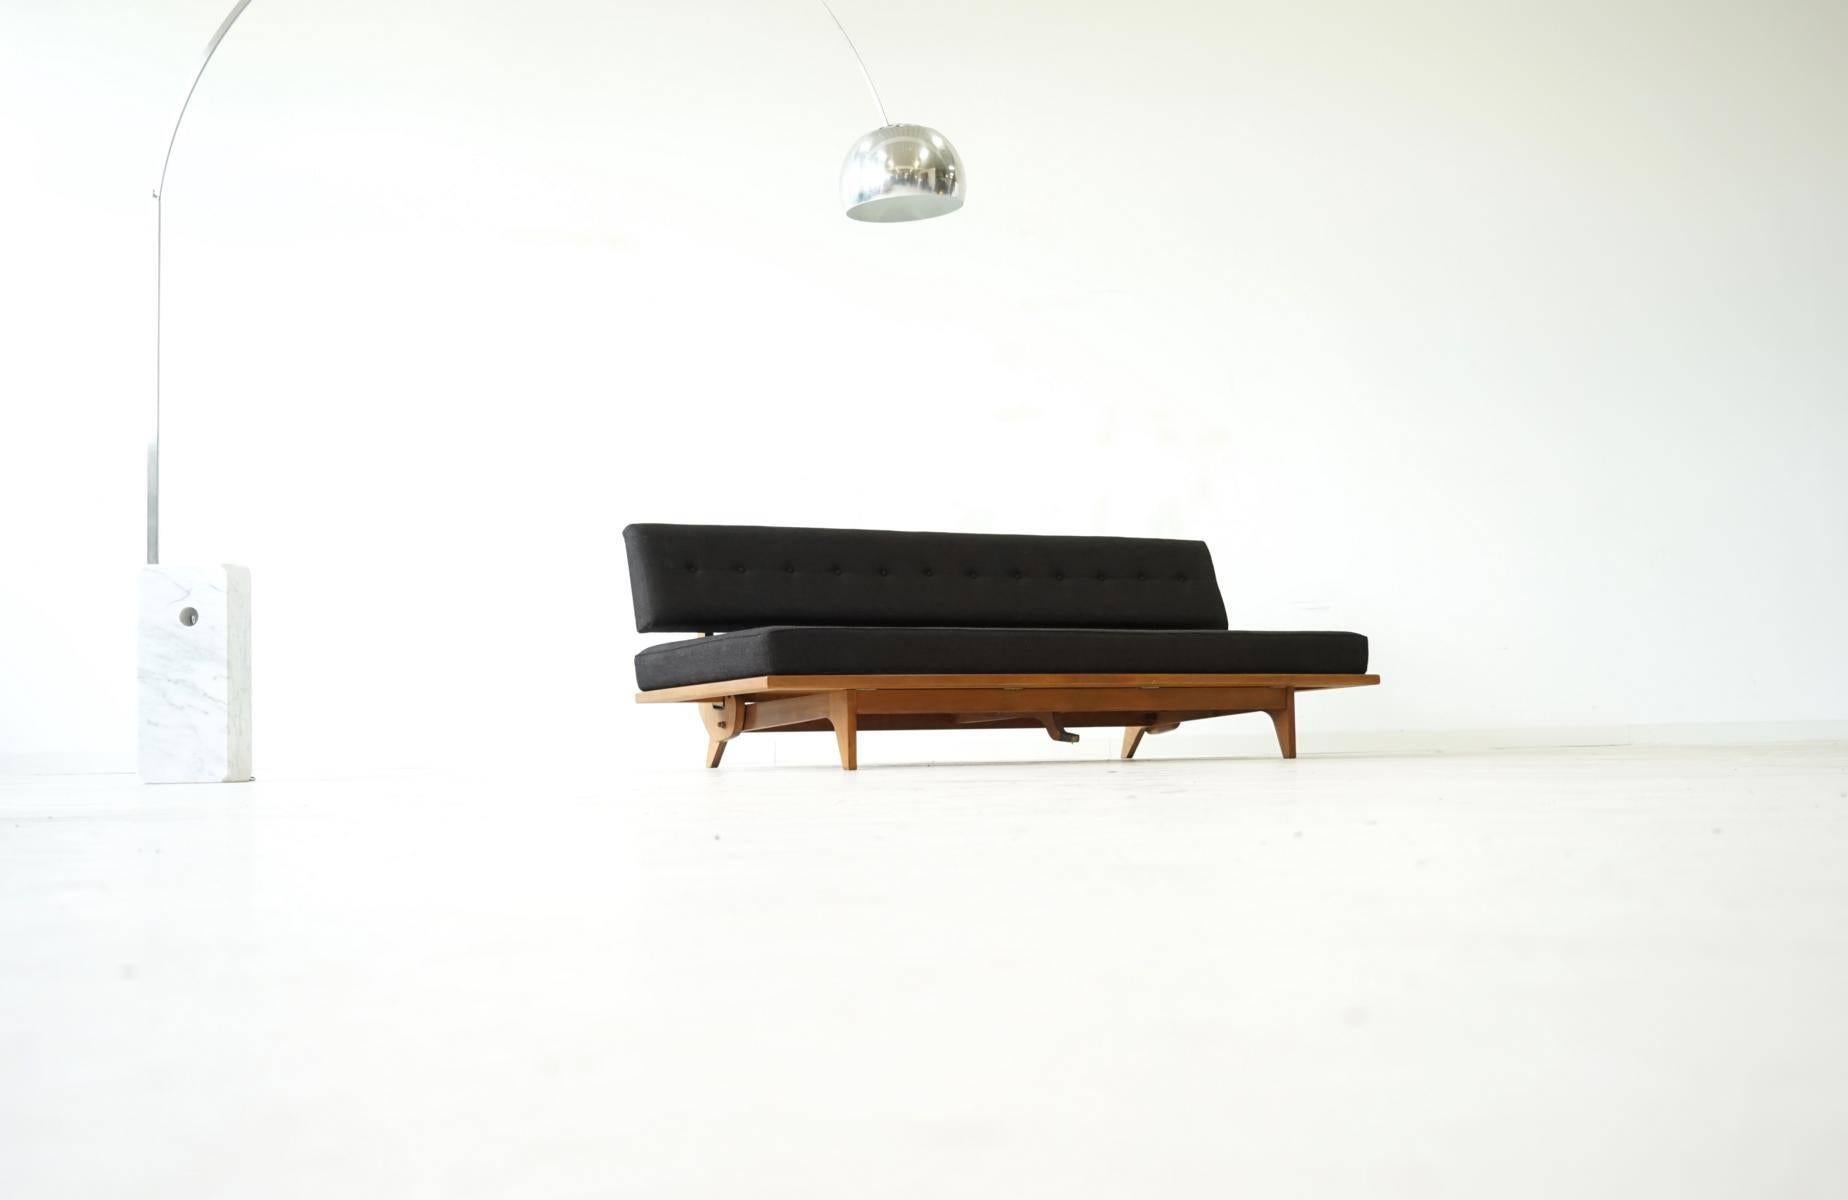 This model 700 sofa can be converted into a daybed. It was designed by Richard Stein and
was produced by Knoll International in 1947-1961. Original KnollTextile Fabric - Lana Braun/Schwarz K950/78.
Inside, the cushion, were renewed. By pushing